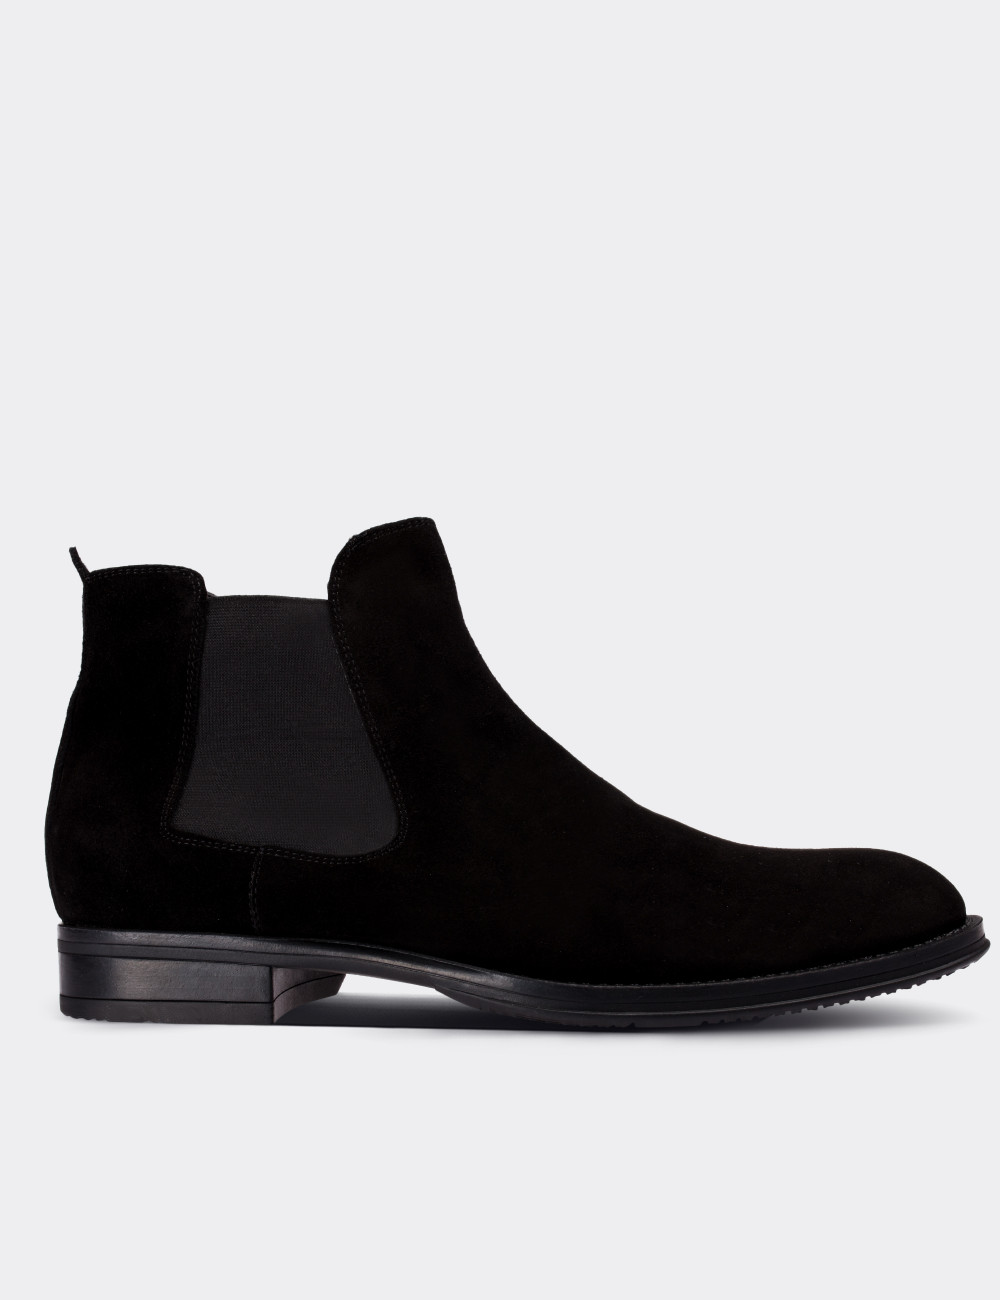 Black Suede Leather Chelsea Boots - 01620MSYHC08